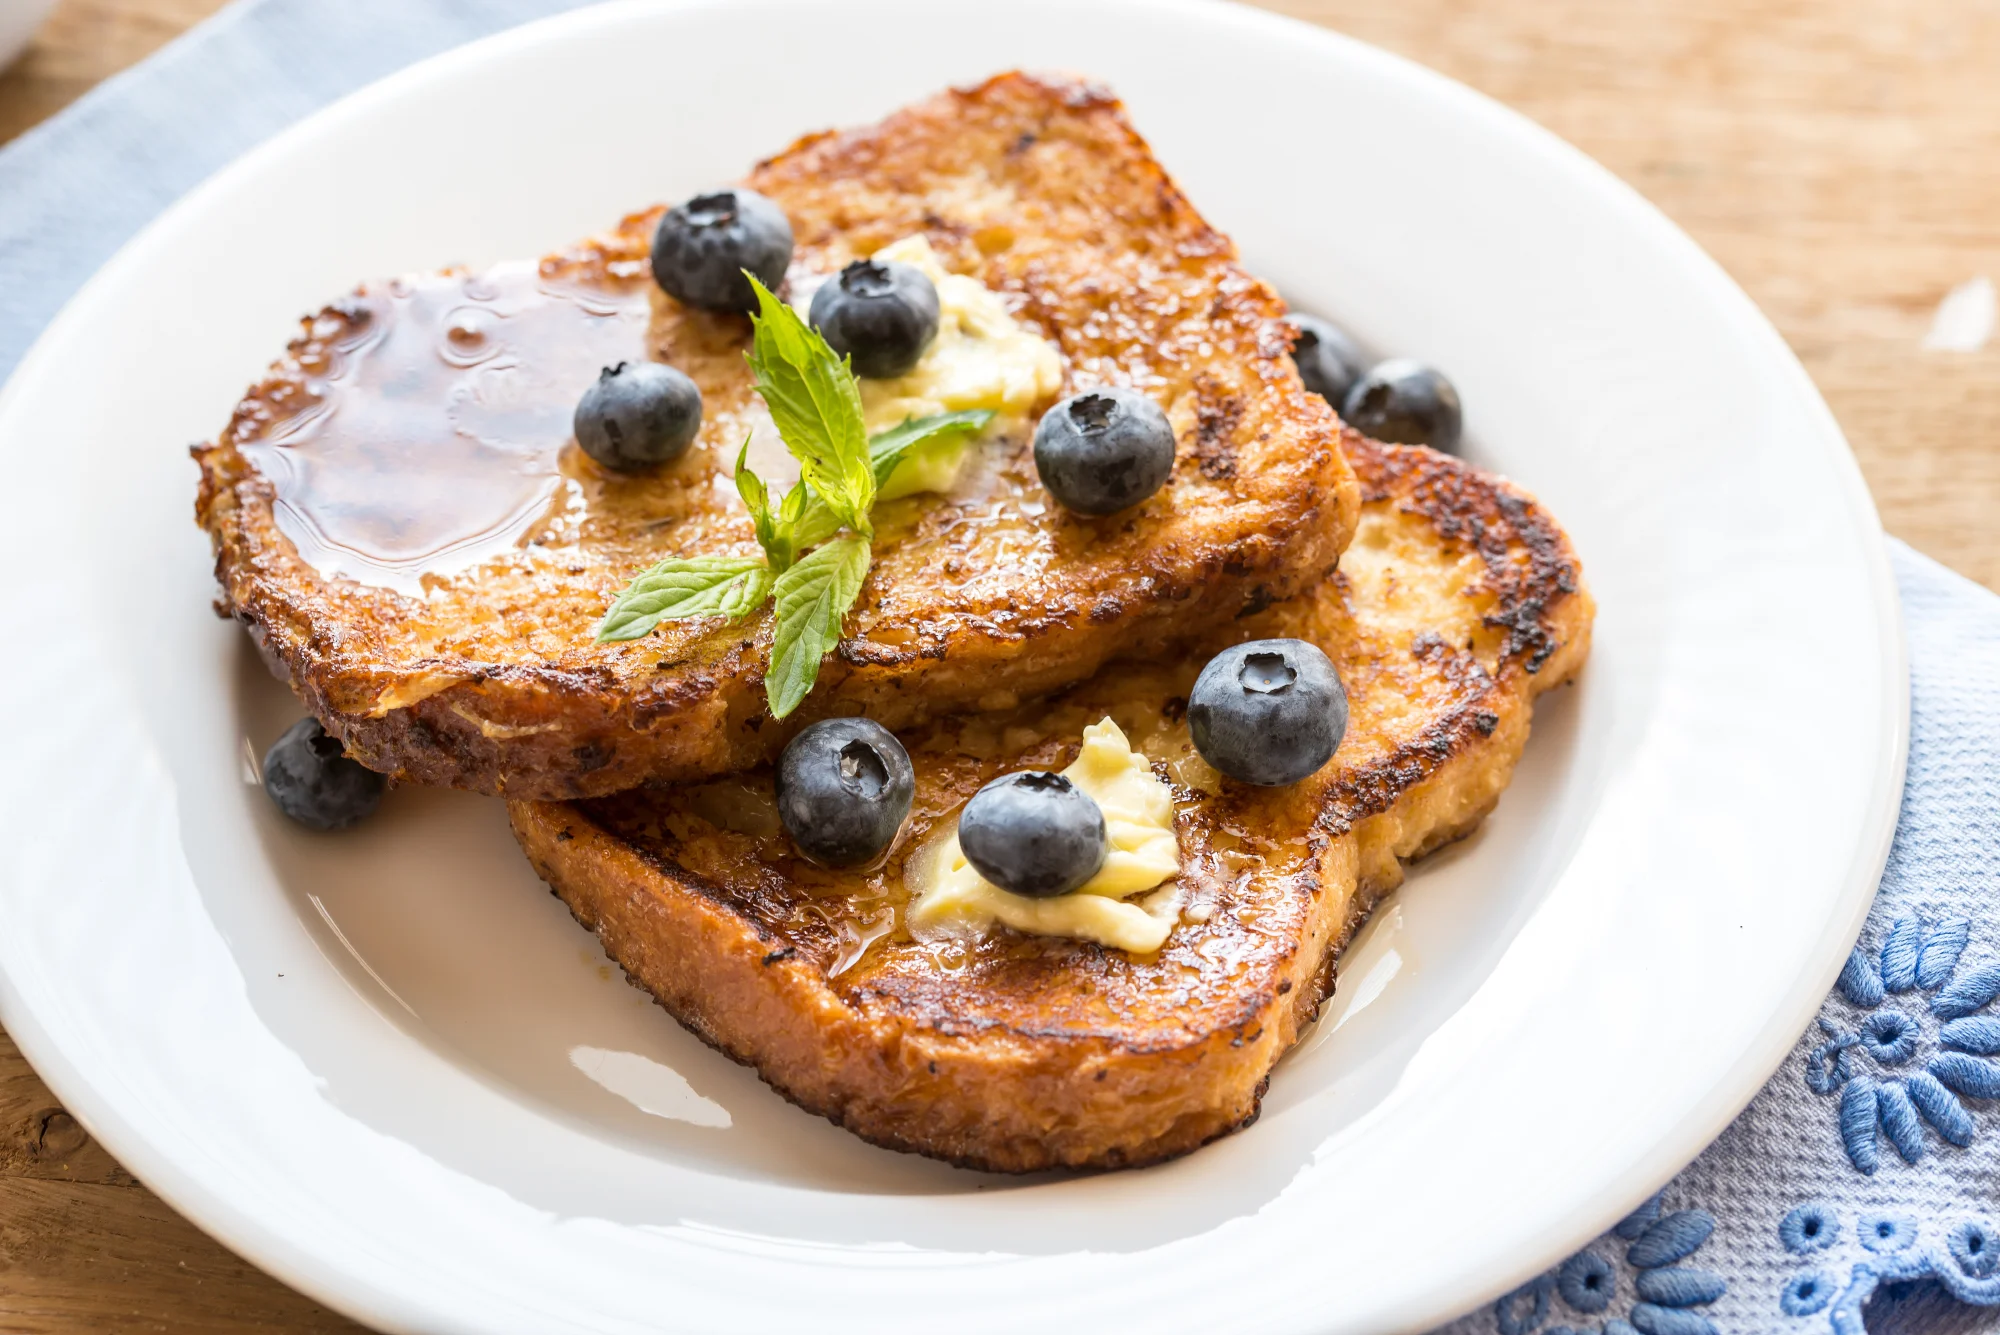 Gourmet french toast with fresh blueberries, Kerrygold Irish butter and real maple syrup.